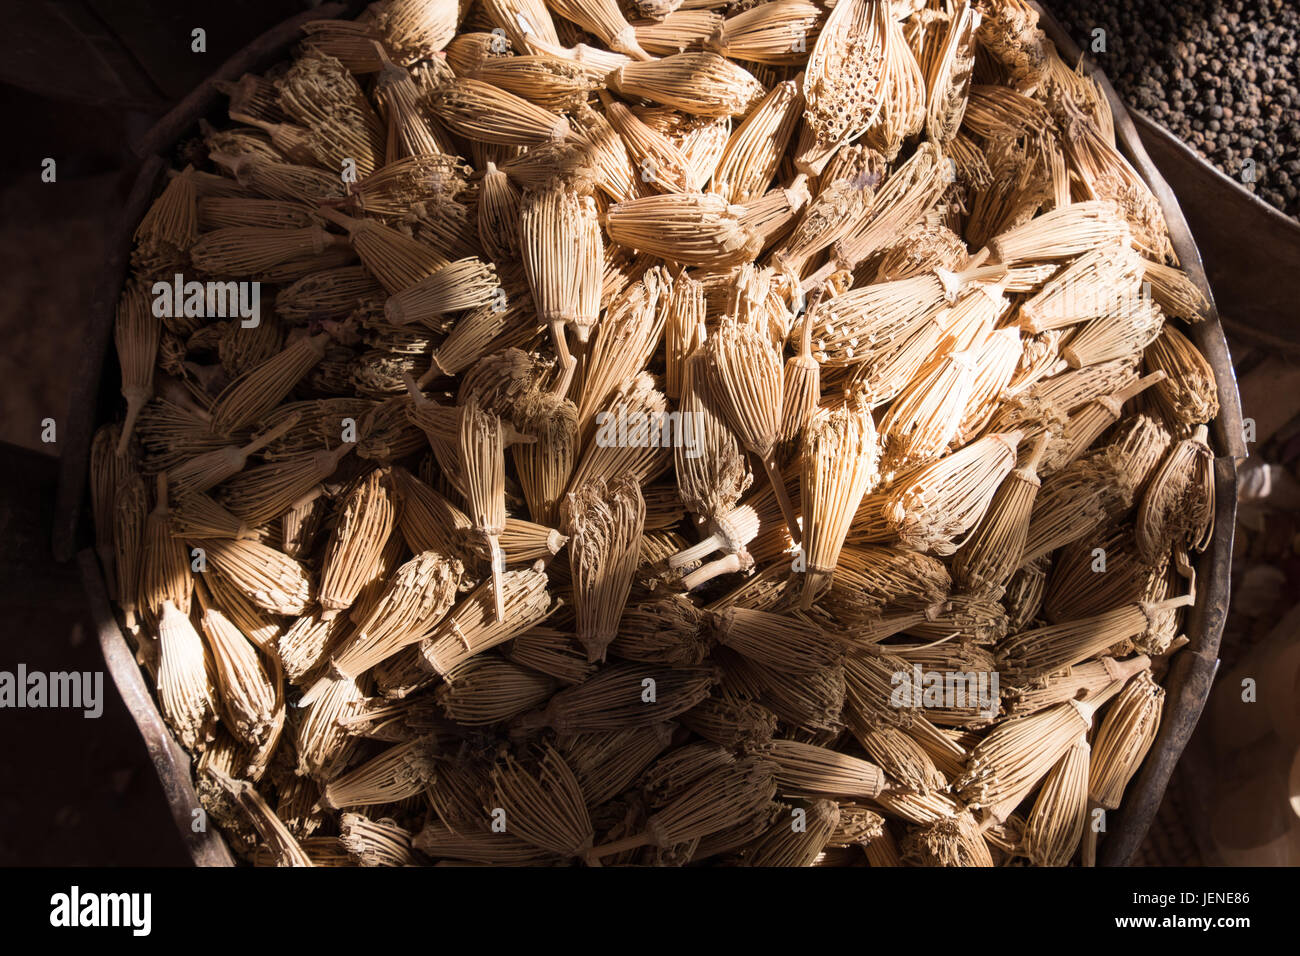 Overhead view of whisks at a market, Morocco Stock Photo